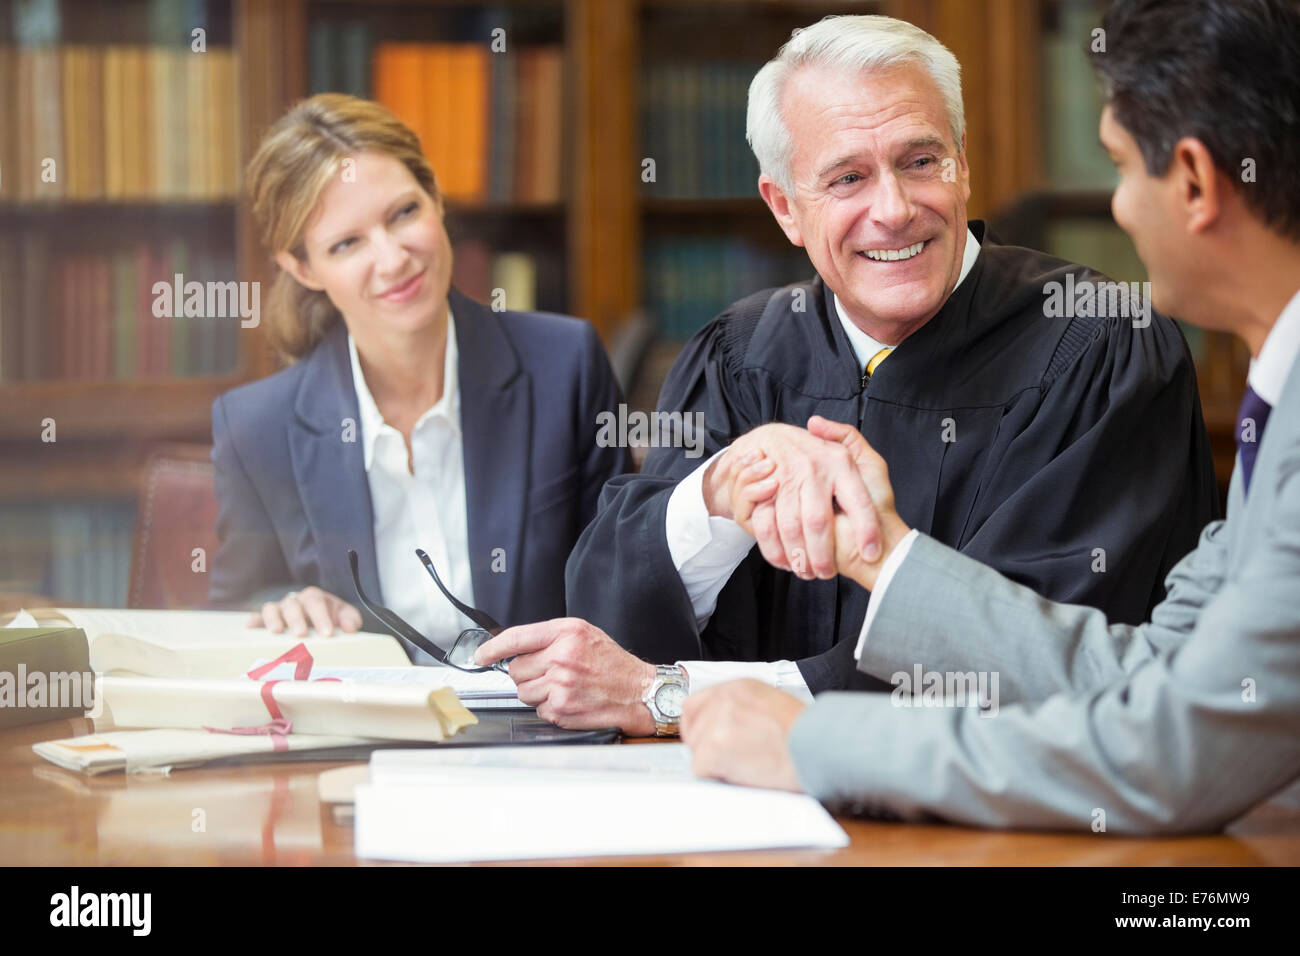 Judge and lawyer shaking hands in chambers Stock Photo